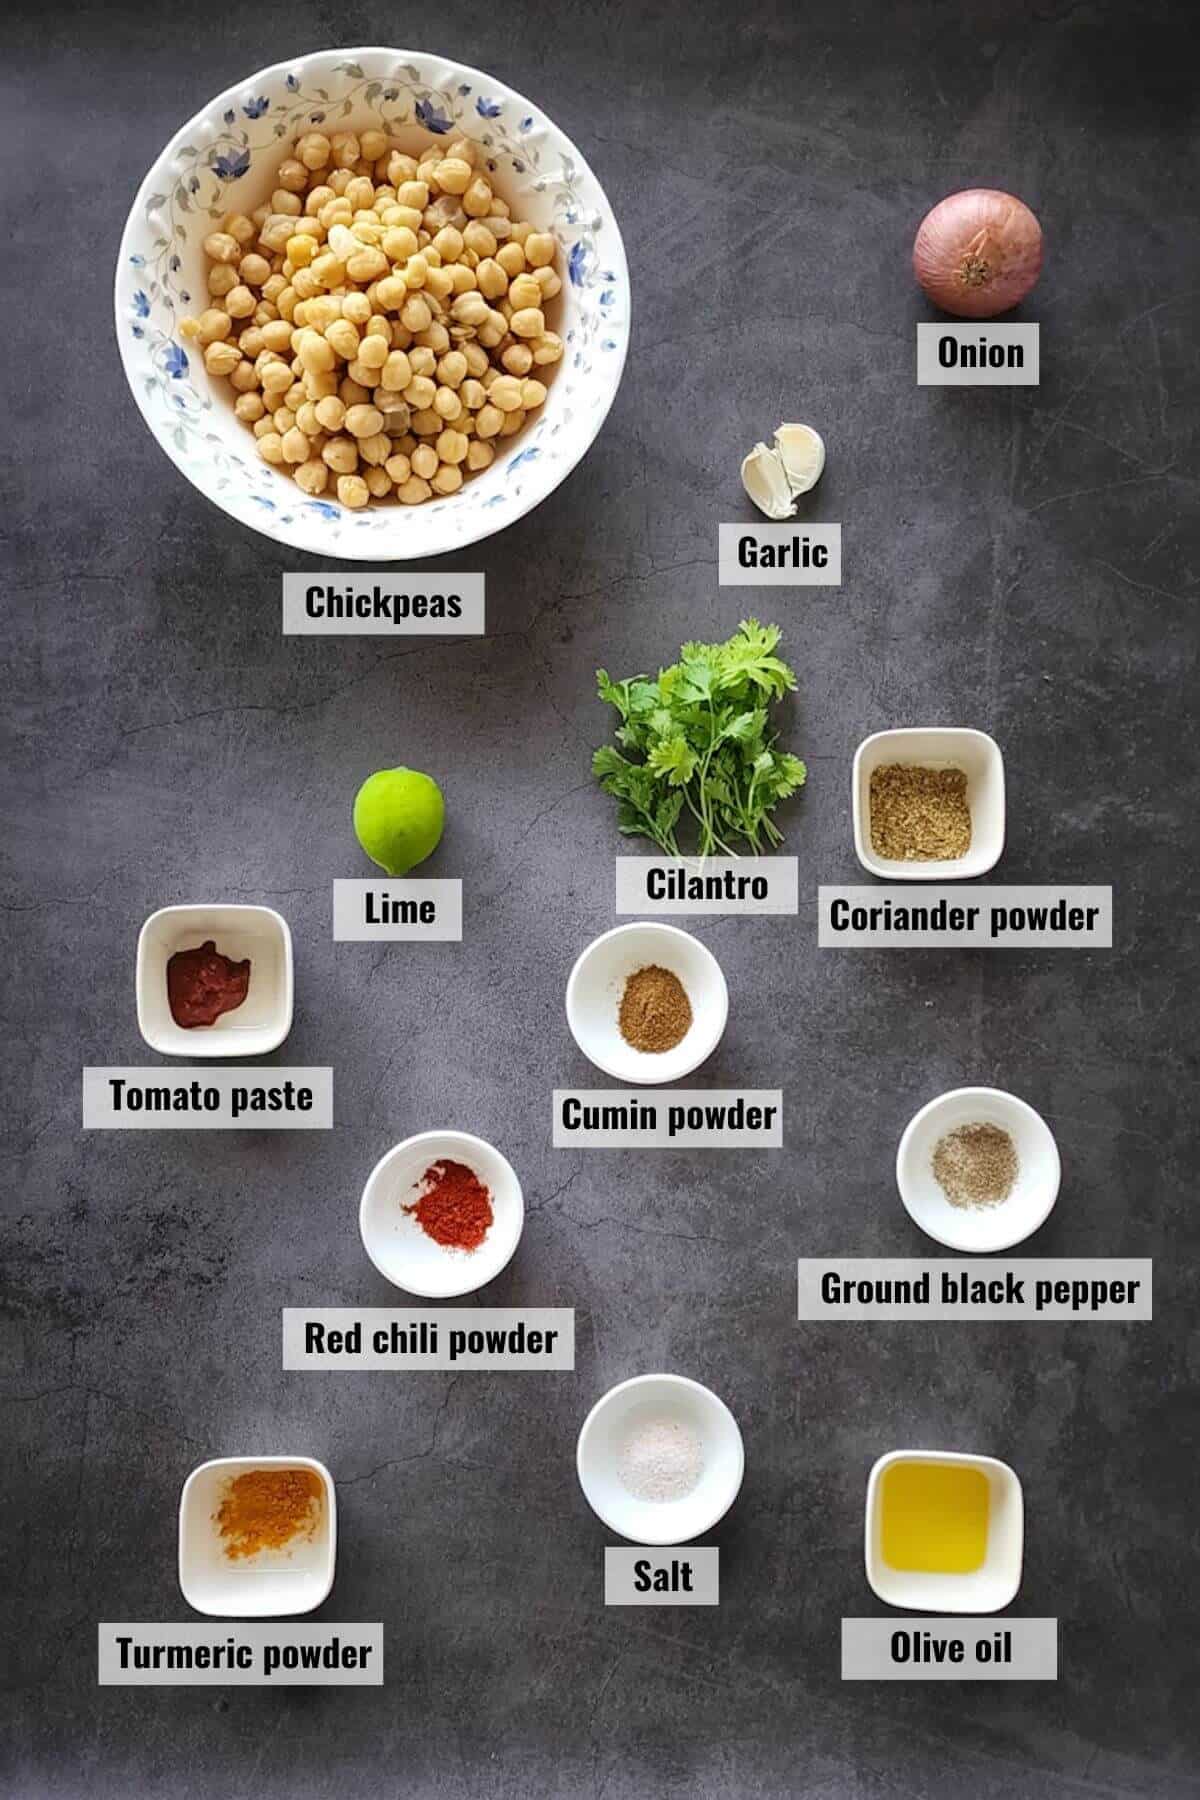 Ingredients required for sauteed chickpeas recipe, labeled.